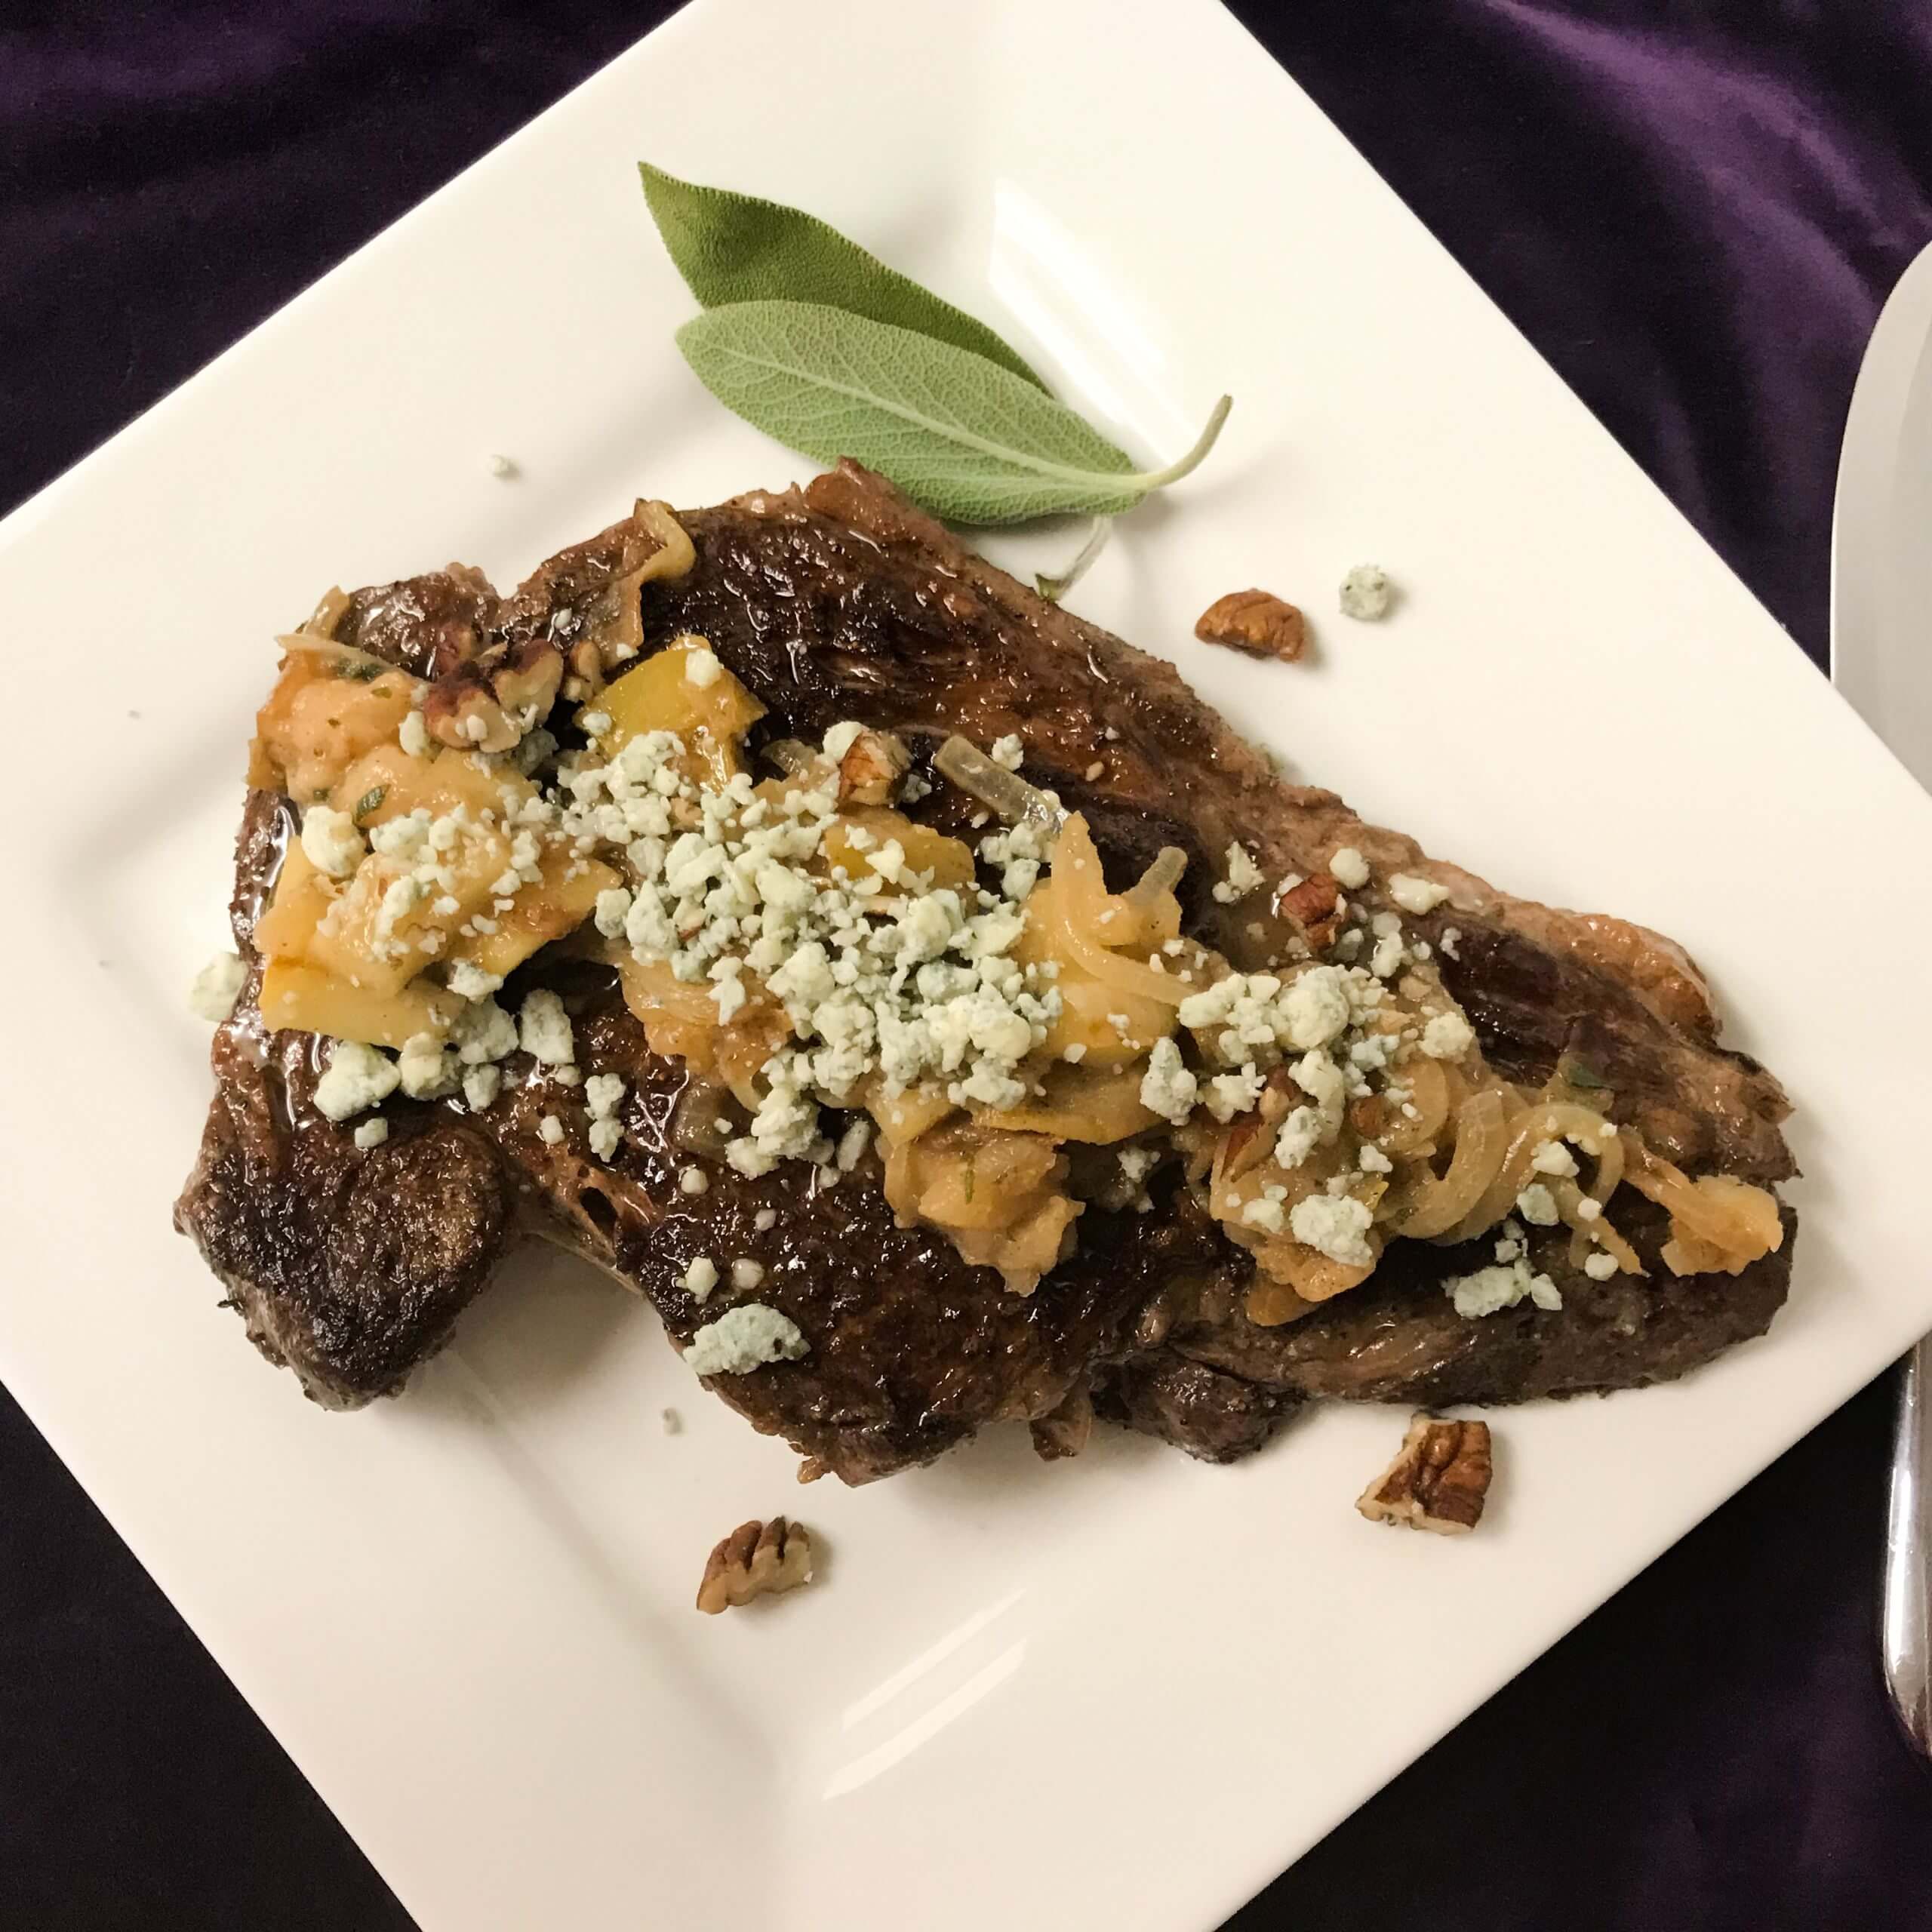 RIBEYE STEAK WITH FRUIT & BLUE CHEESE CRUMBLE | My Curated Tastes